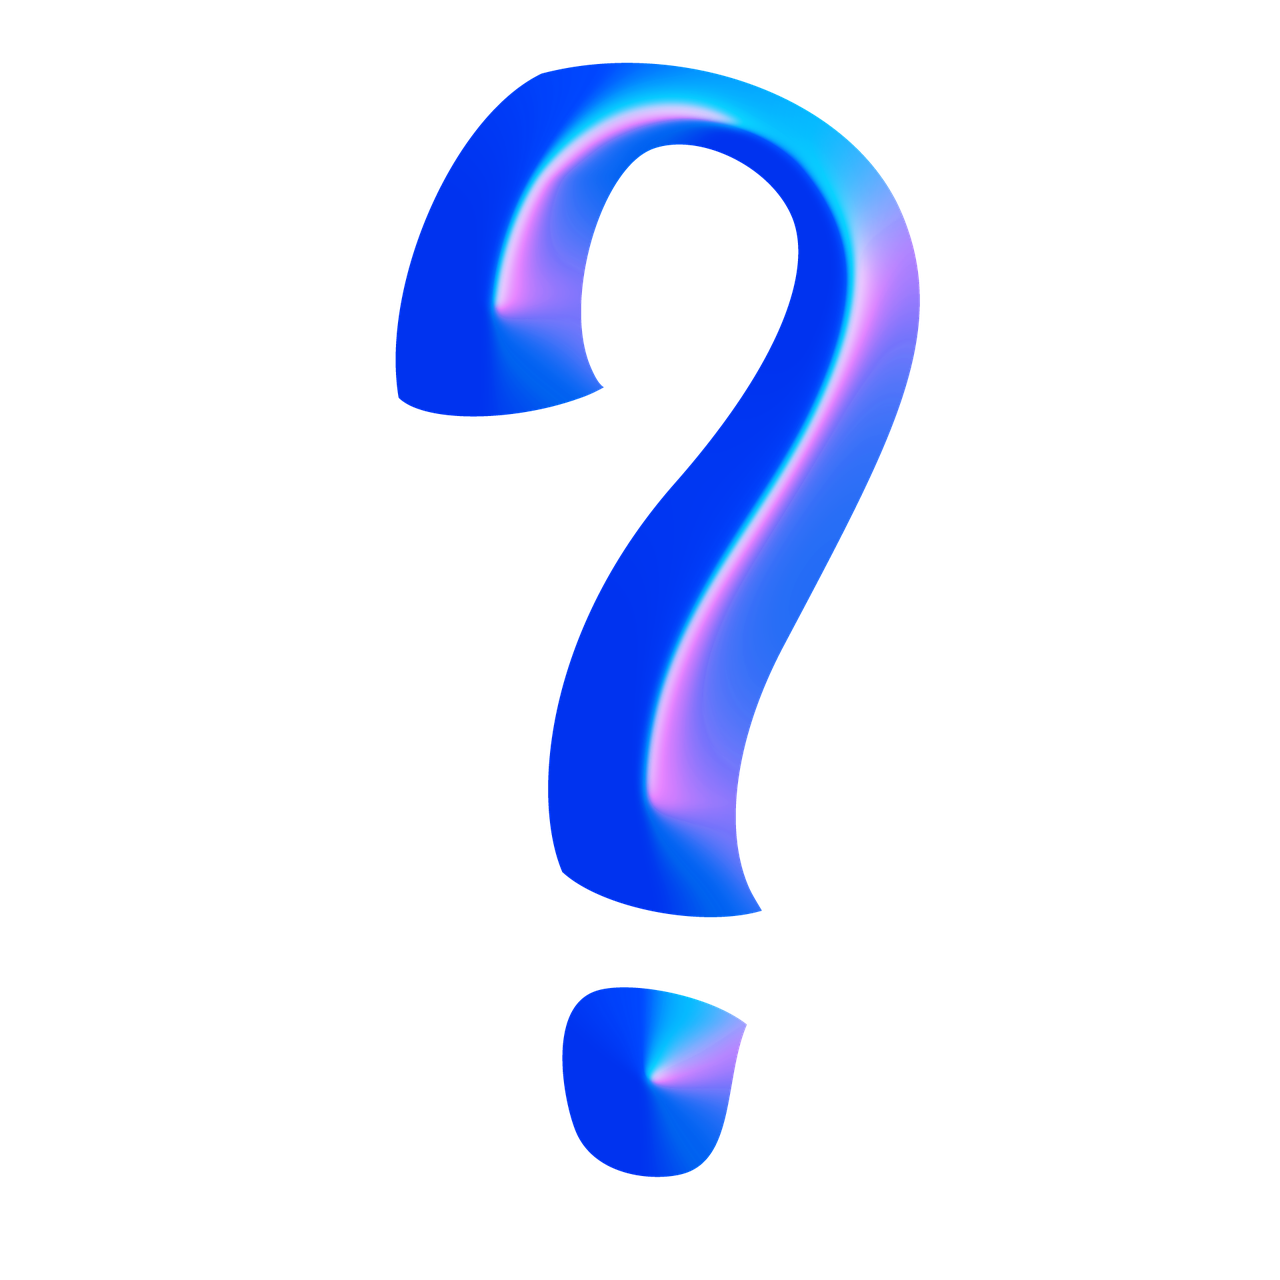 question mark question icon free photo